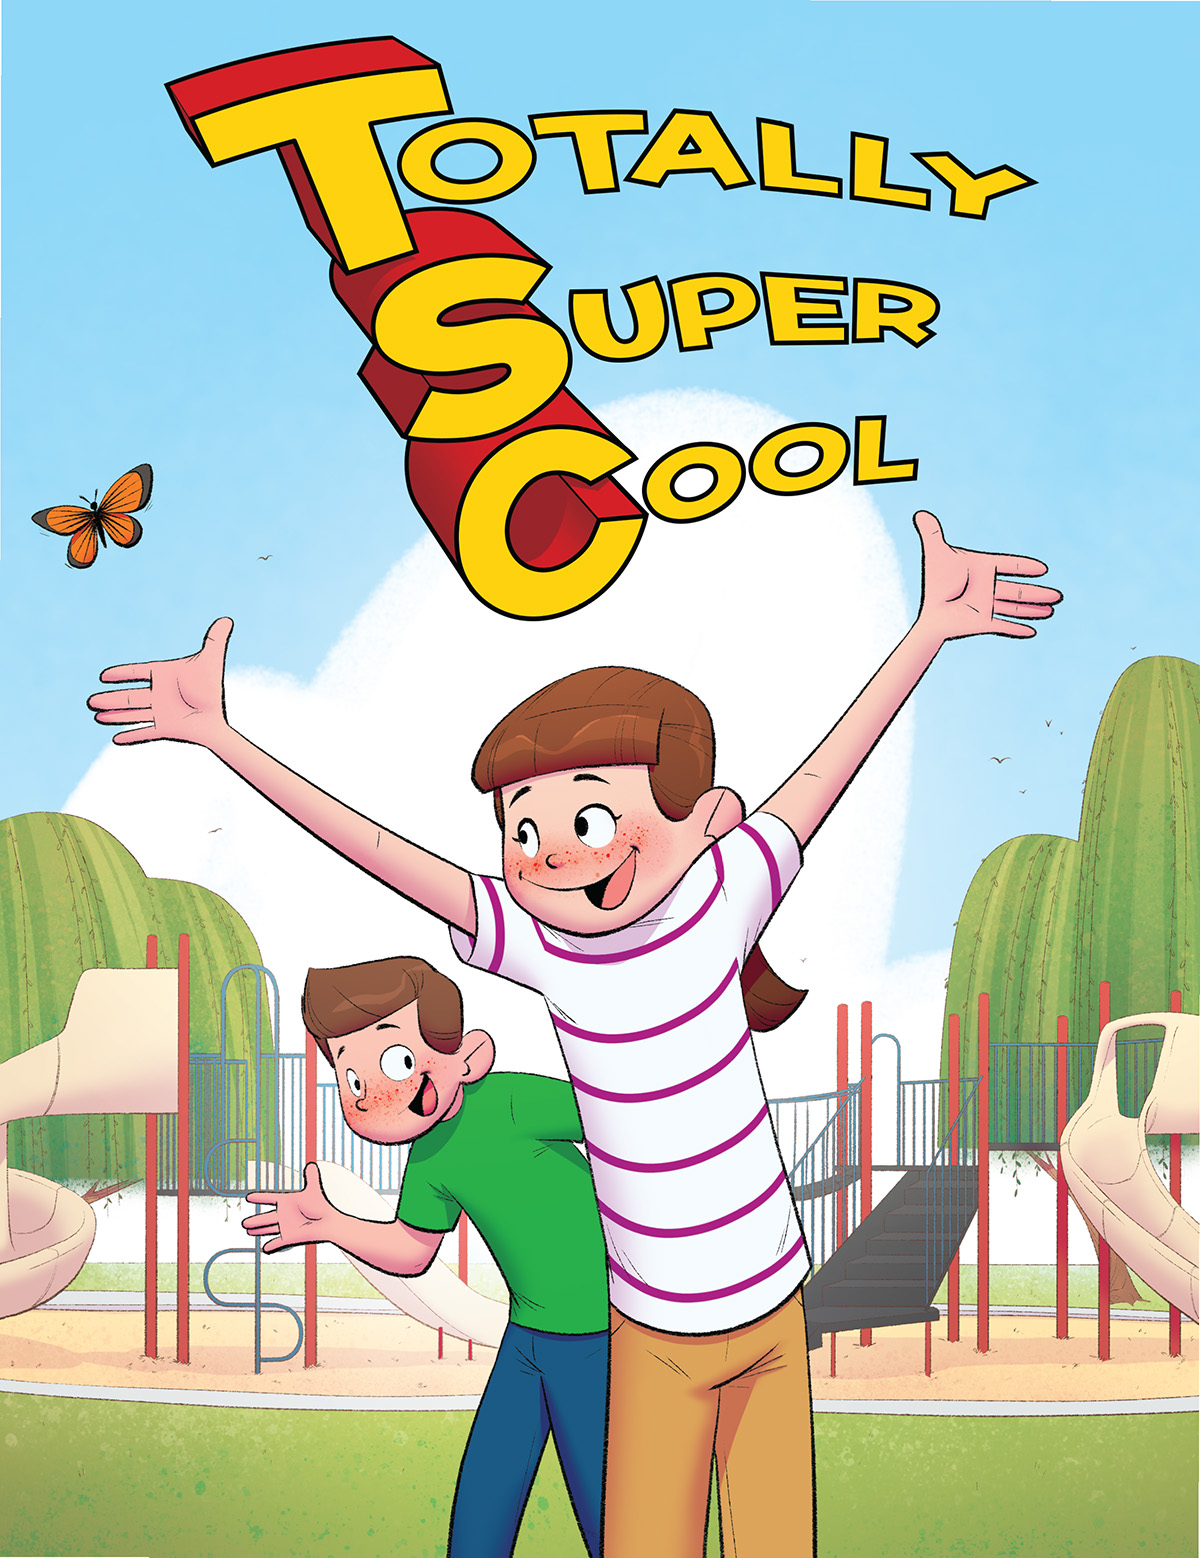 A book cover with Totally Super Cool written in large print and the T, S, and C at the beginning of each word accentuated. Below the title are cartoon images of two children in front of a playground. Each child has little red bumps drawn across their face to represent their facial angiofibroma.